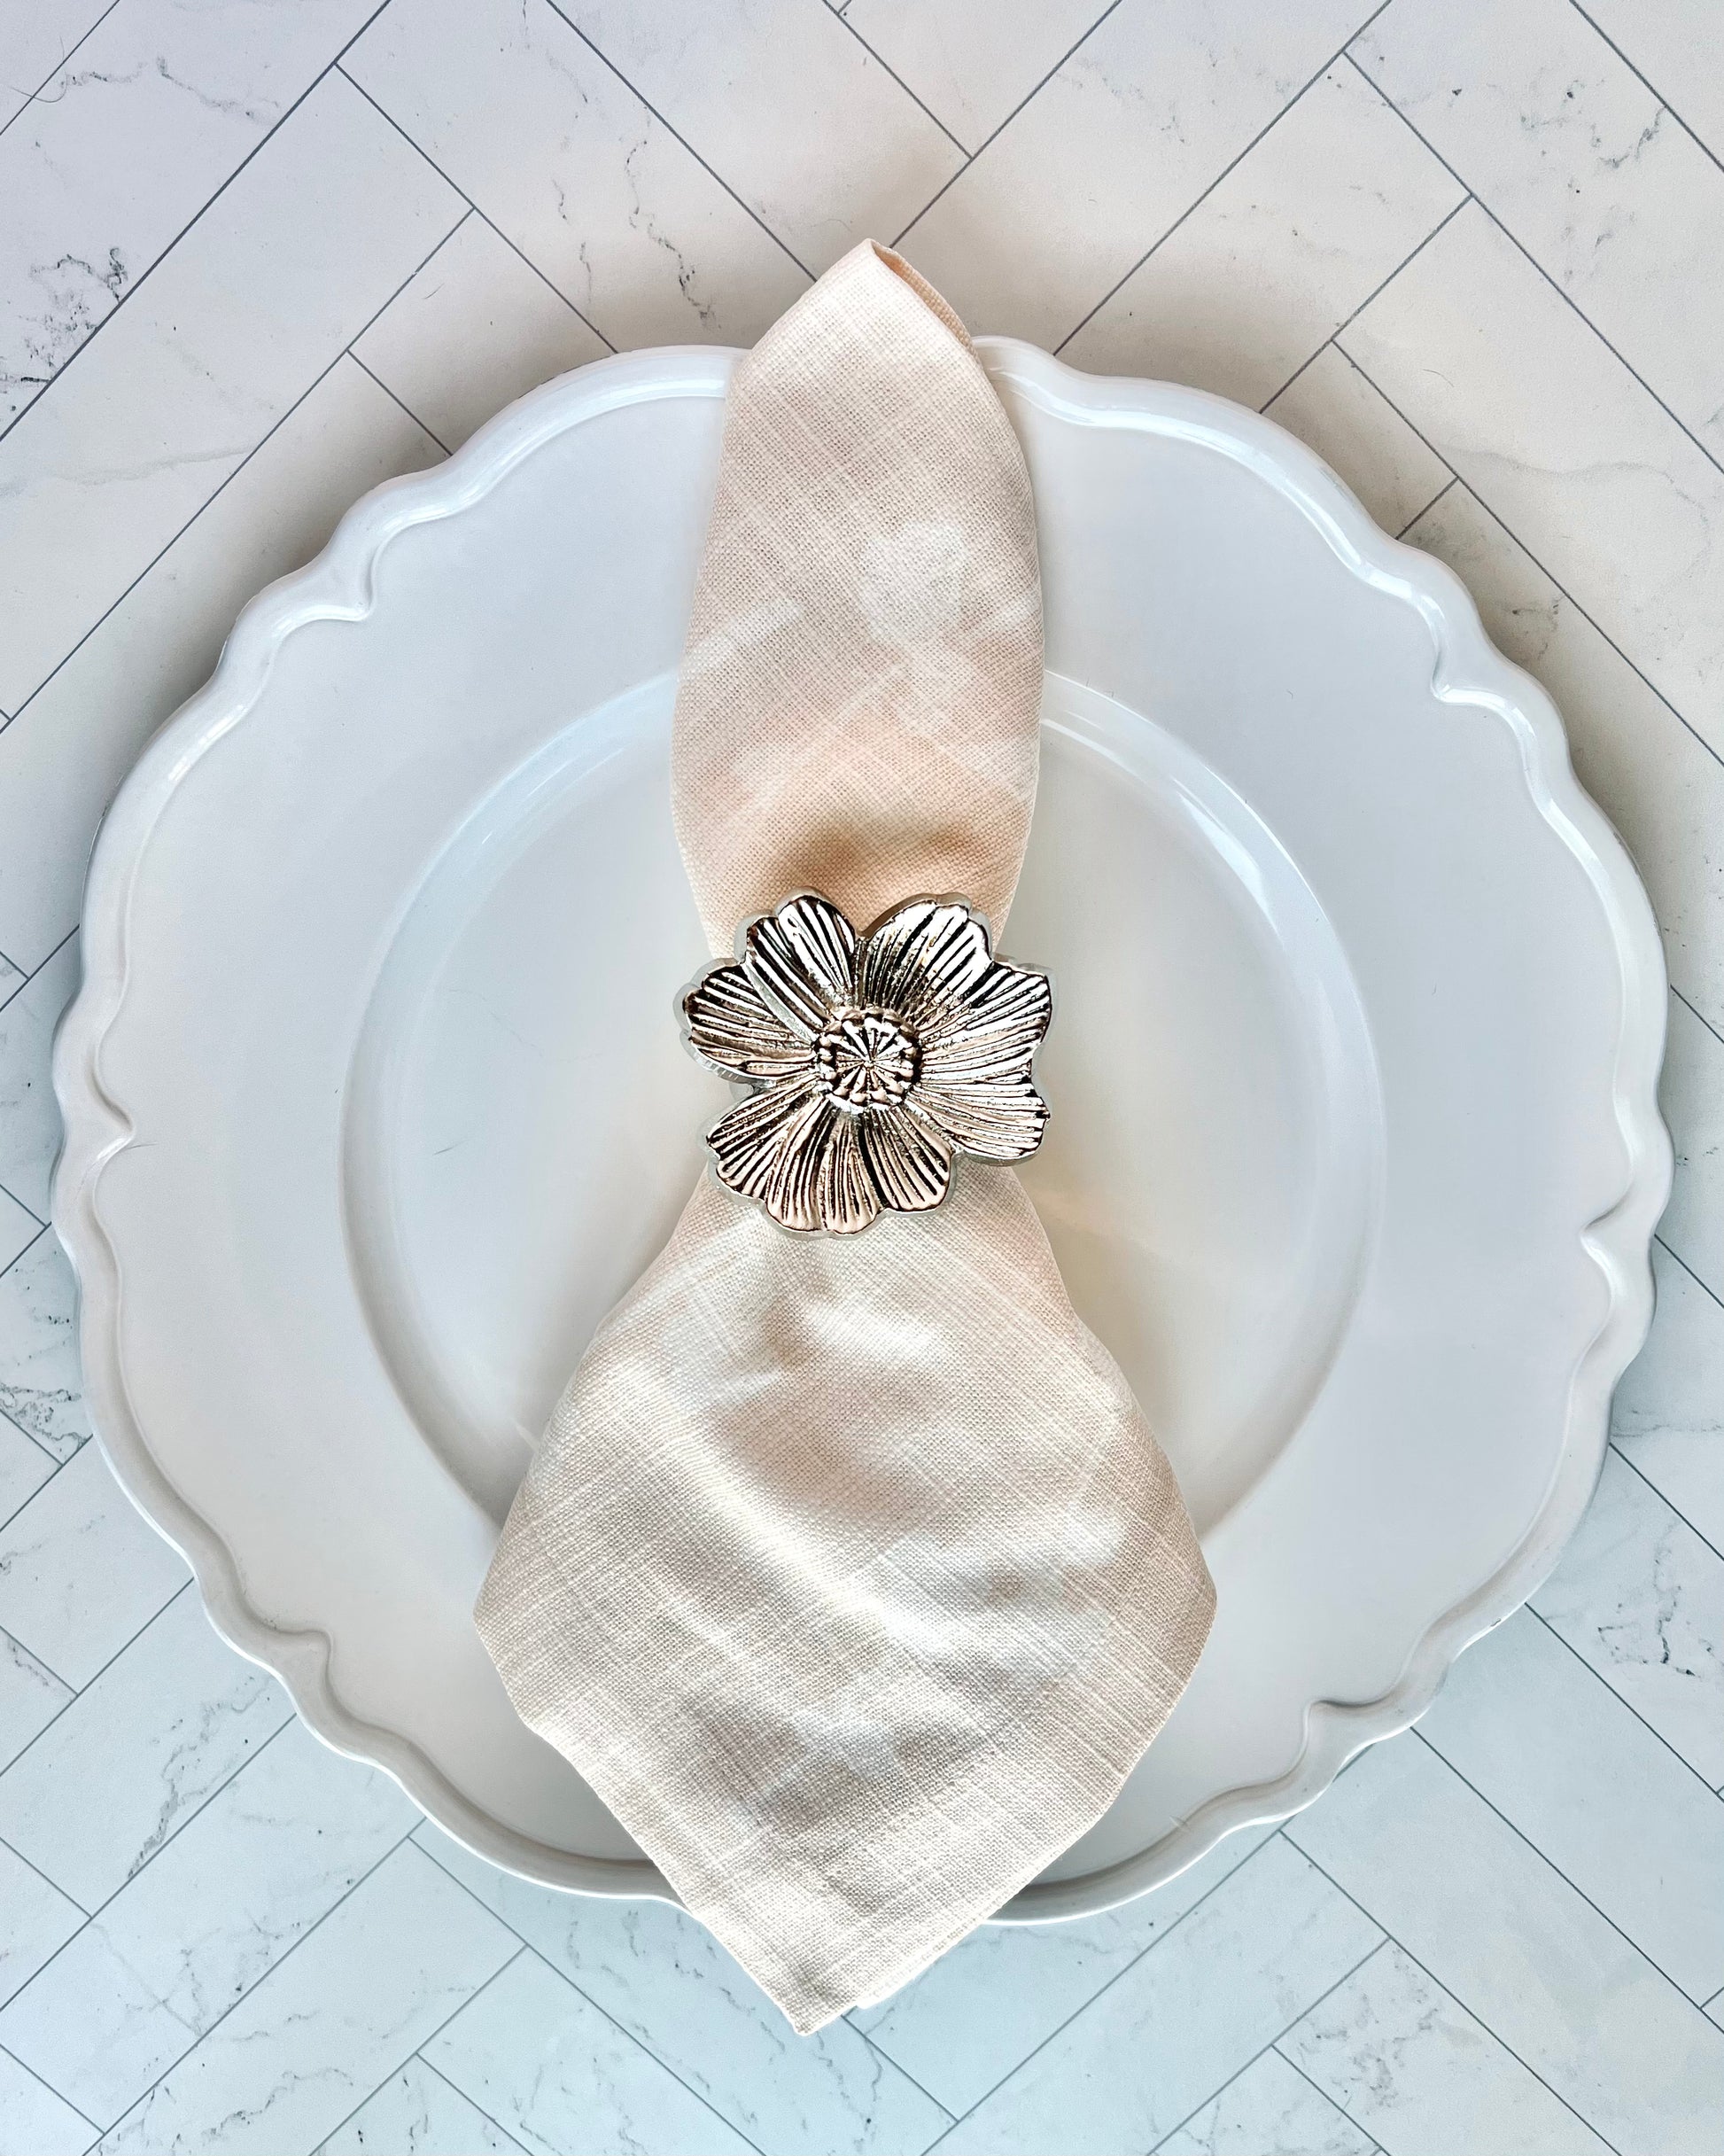 A pink floral napkin wrapped inside a silver flower napkin ring on a white plate